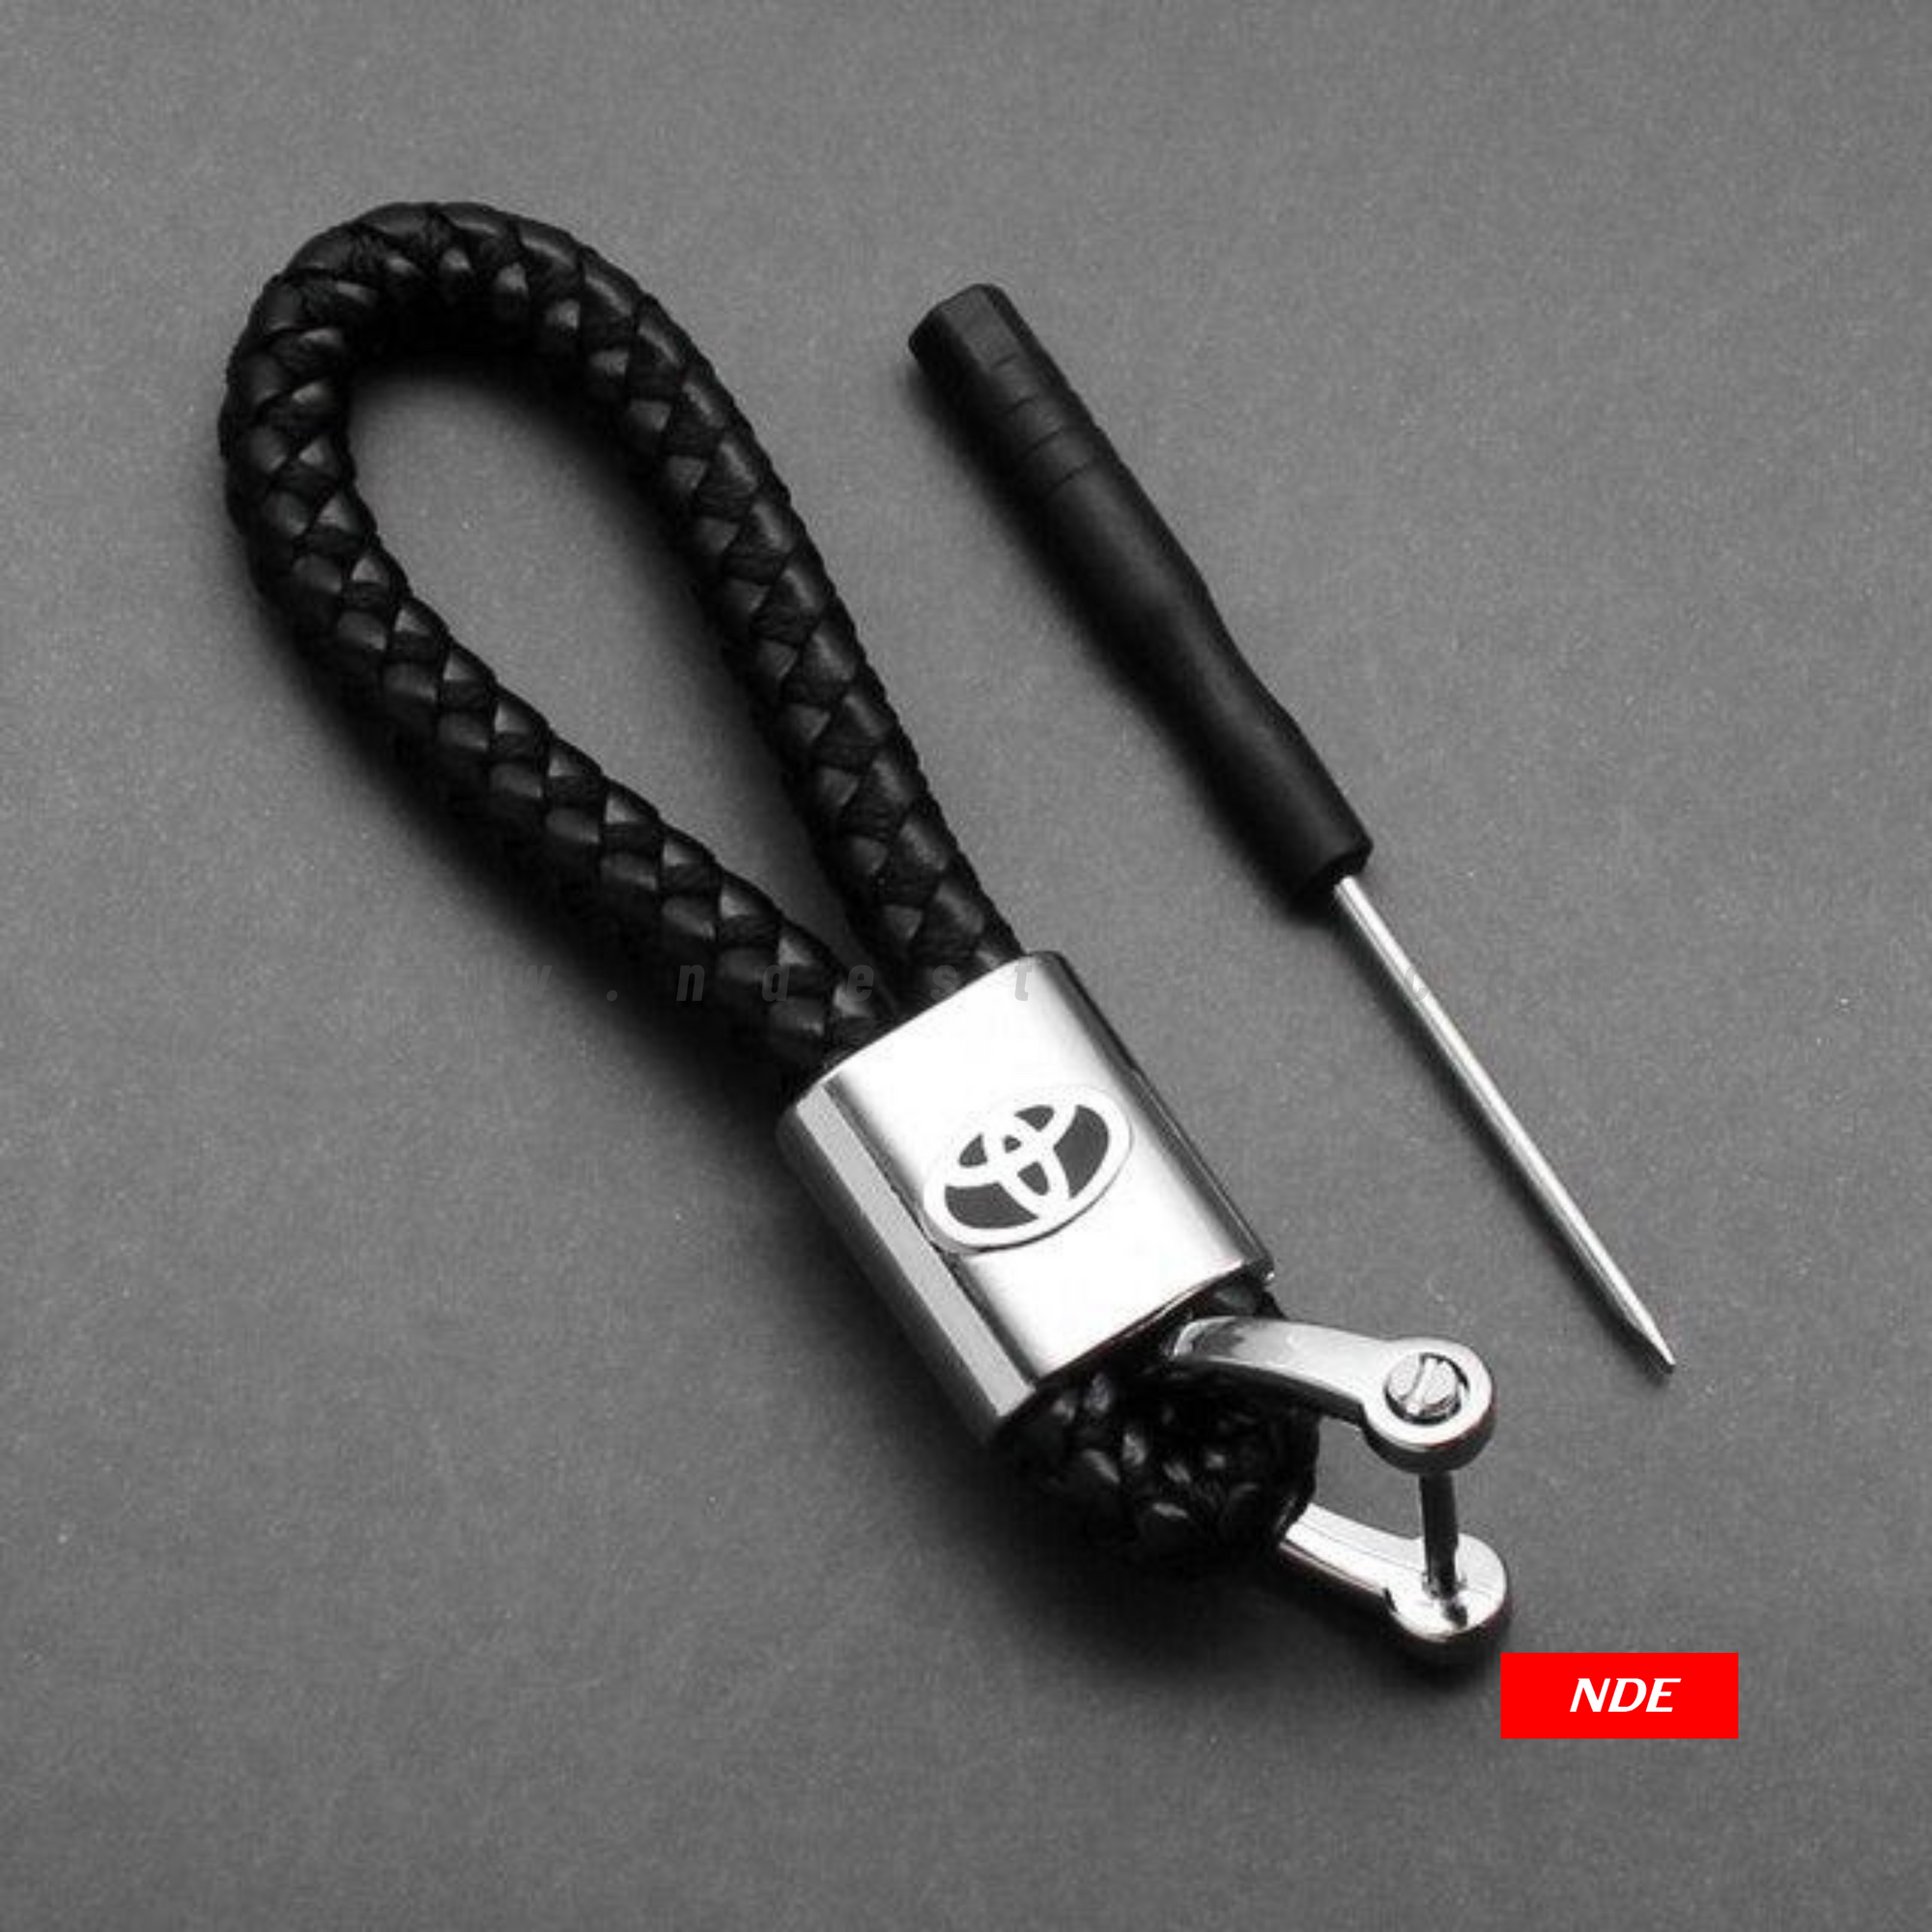 KEY CHAIN LEATHER STRAP WITH TOYOTA LOGO